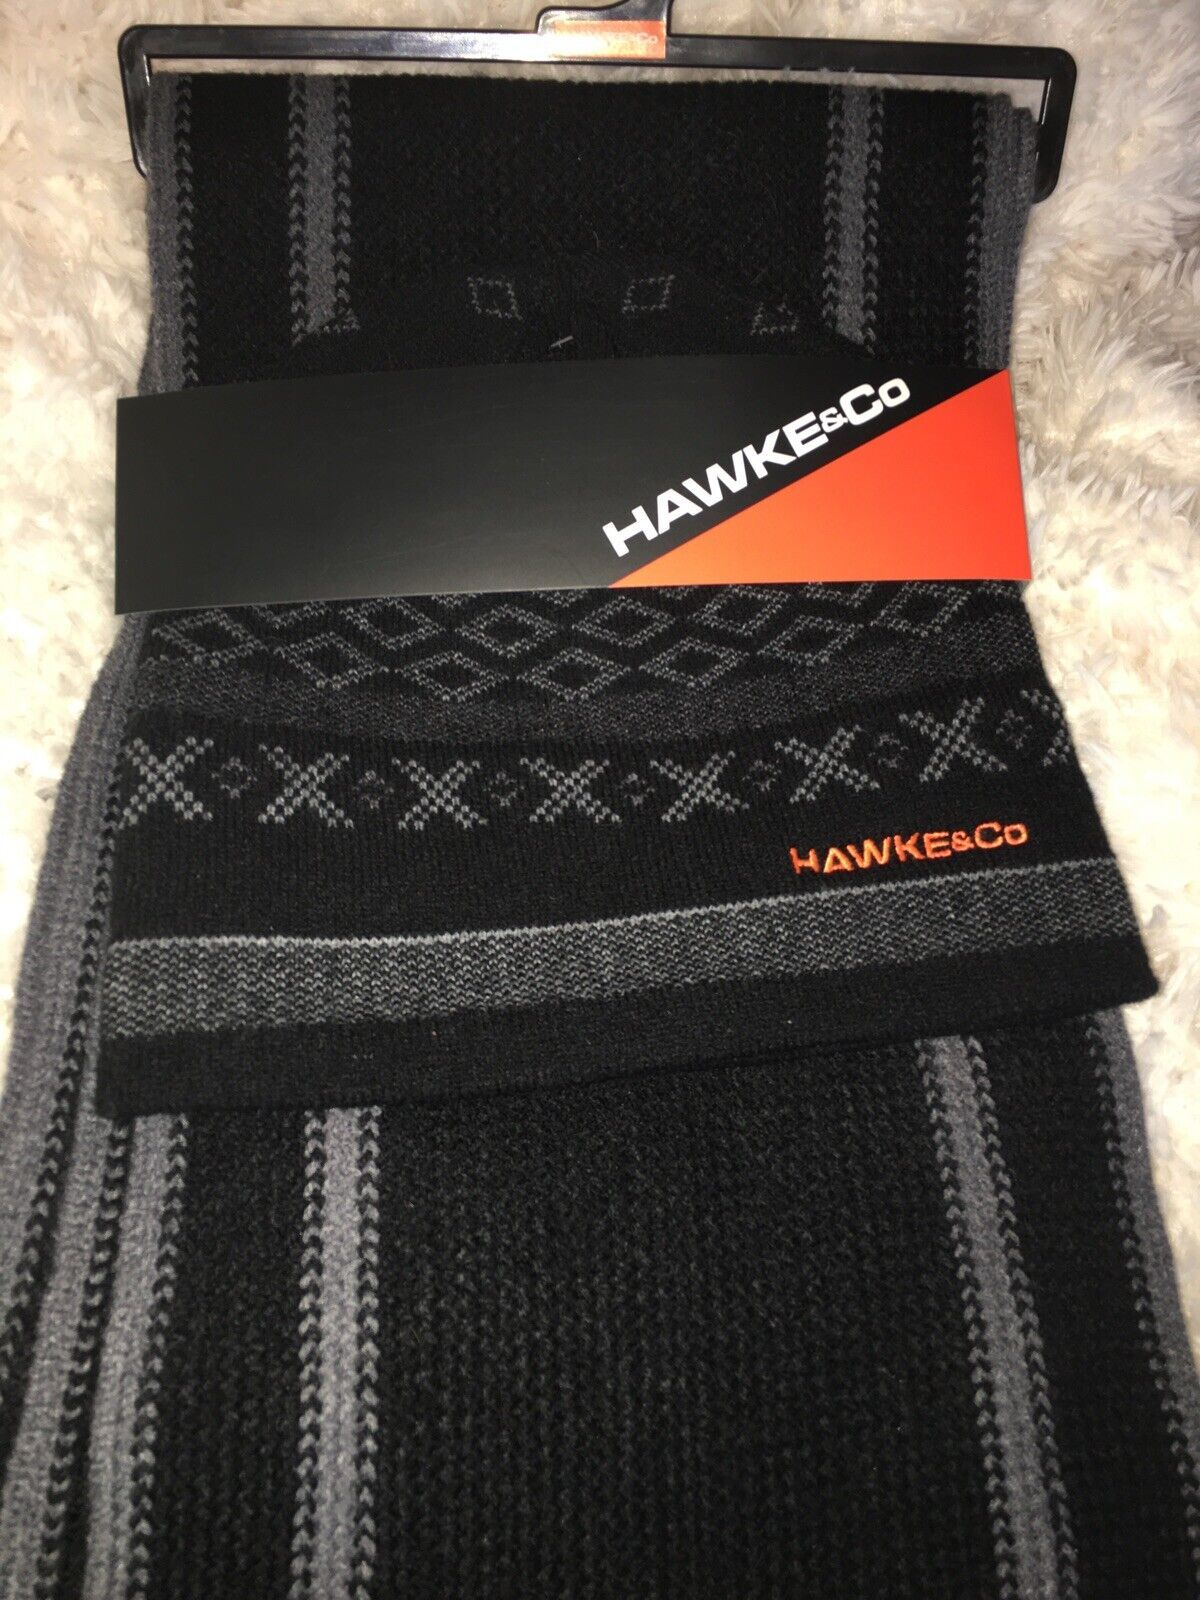 Primary image for Hawke & Co Winter Beanie Hat and Scarf Set Black And Gray new